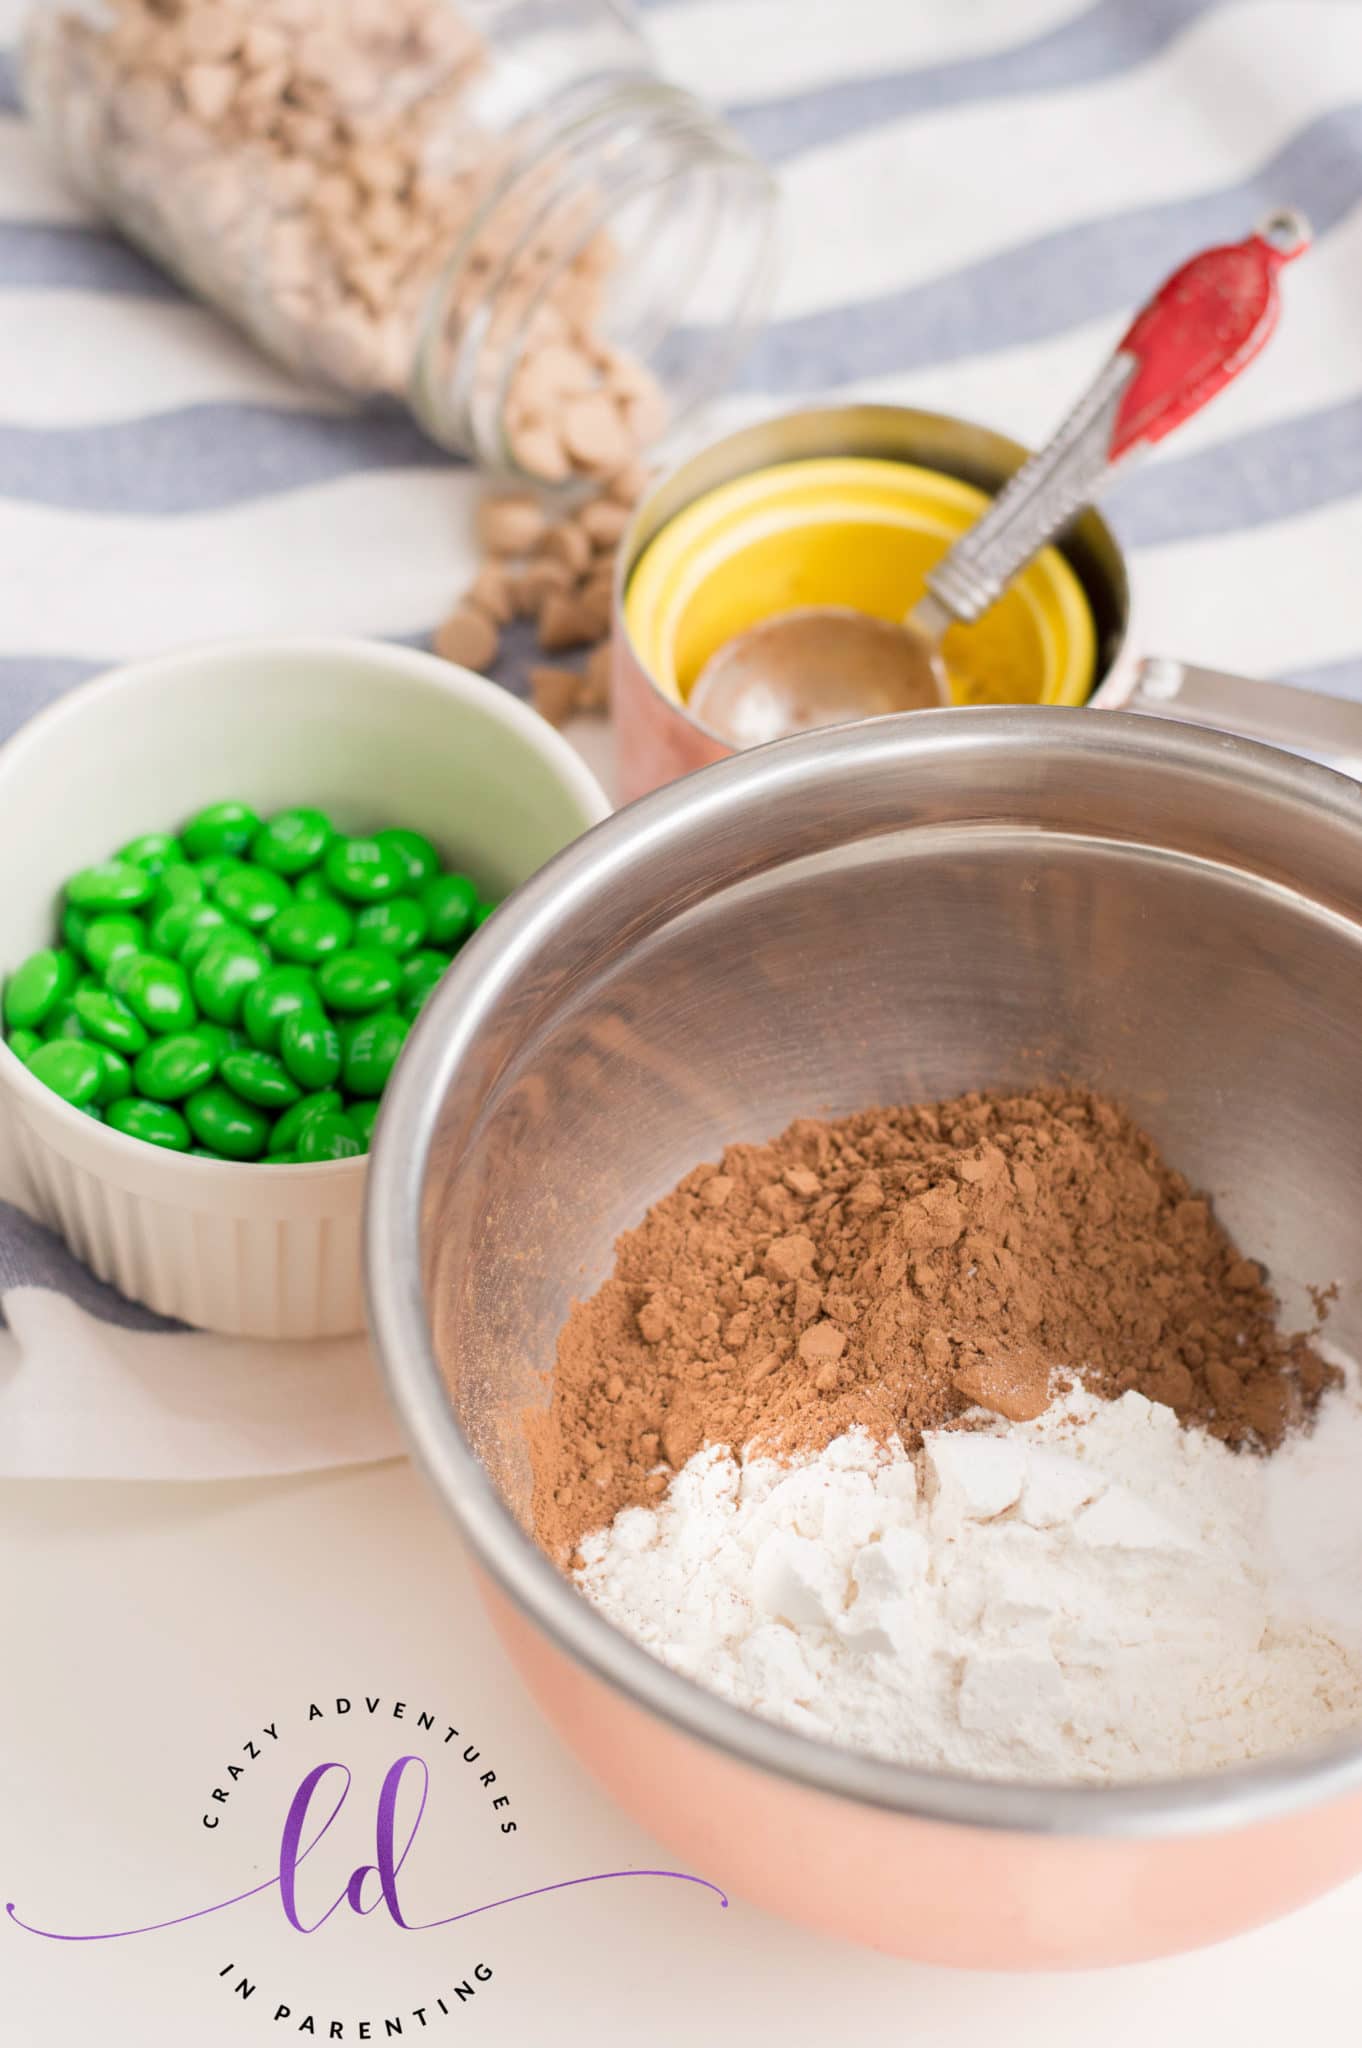 Sift Dry Ingredients to Make St Patricks Day Chocolate Cookies